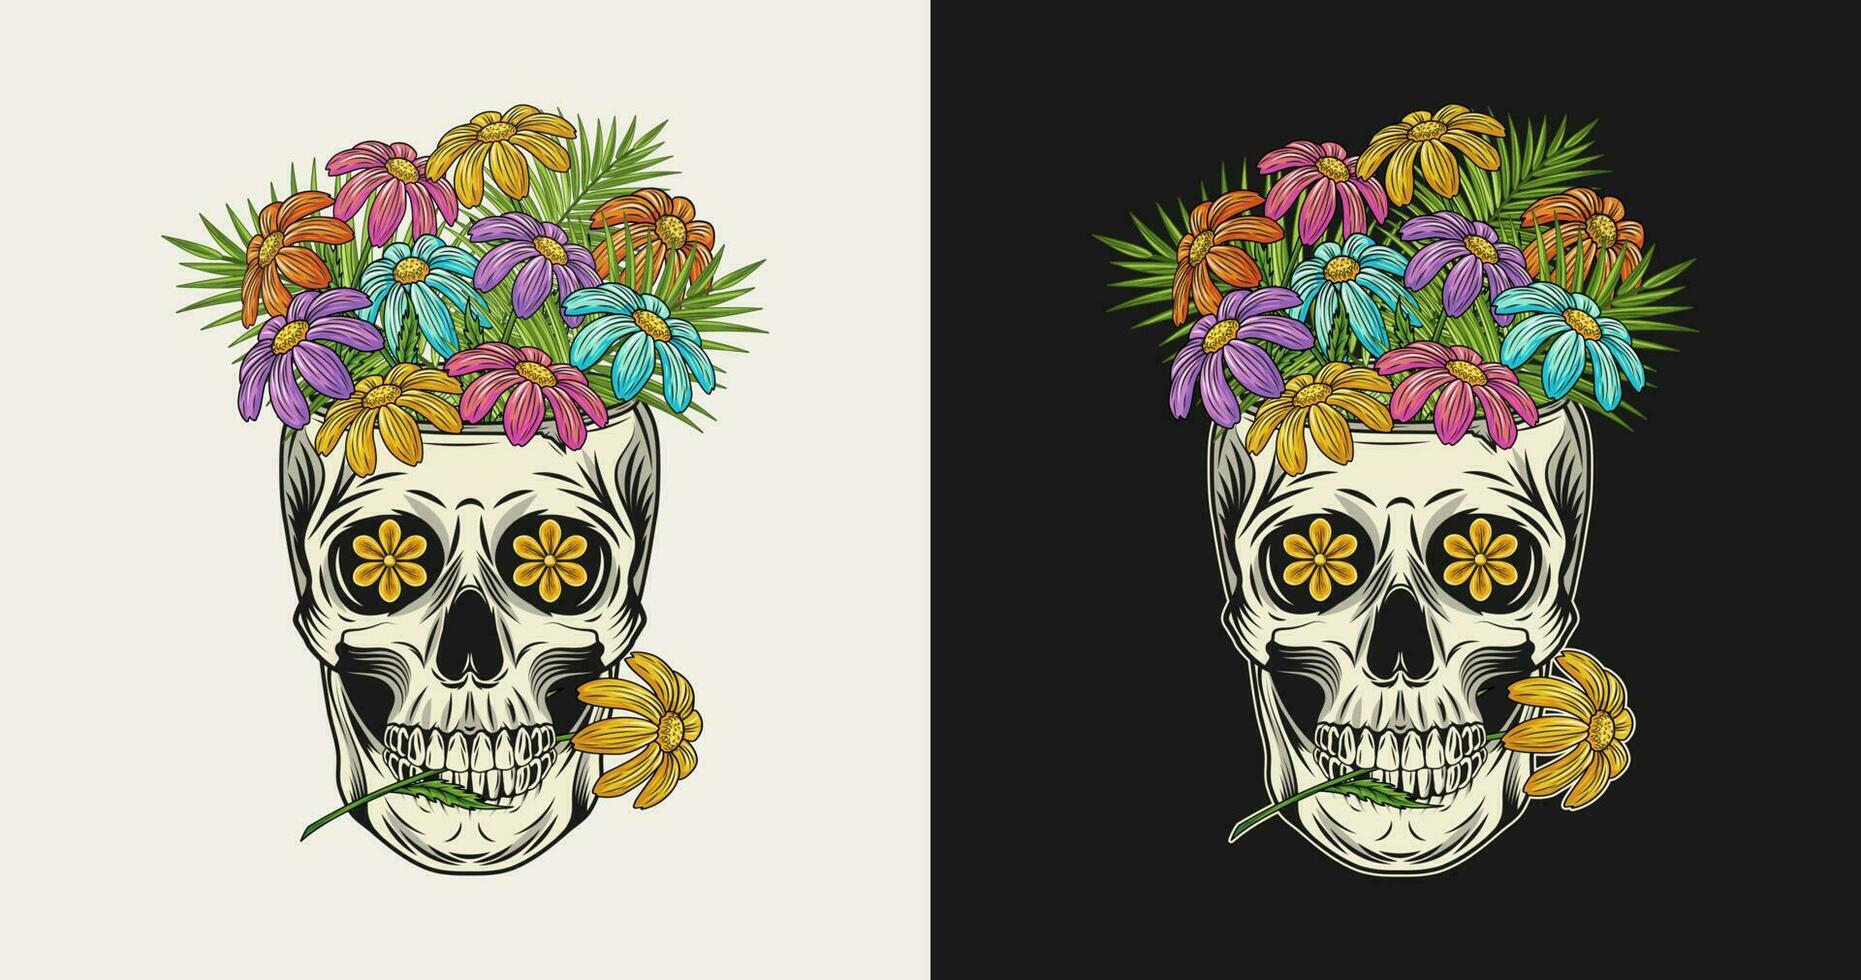 Human skull like cup full of chamomile flowers. Skull holding flower between teeth. Groovy hippie retro style Front view illustration in vintage style. vector